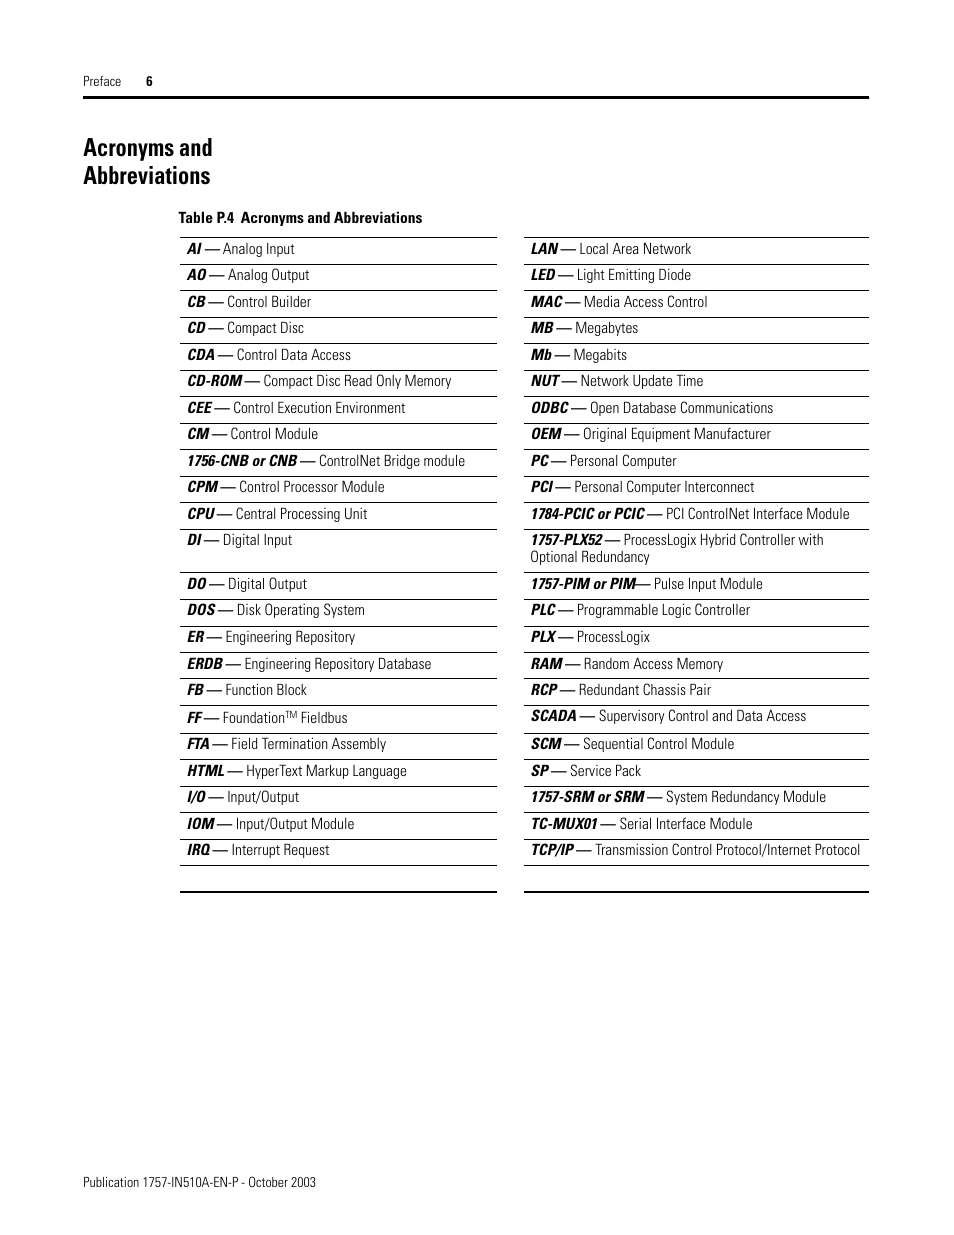 Acronyms and abbreviations | Rockwell Automation 1757-SWKIT5100 ProcessLogix R510.0 Installation and Upgrade Guide User Manual | Page 16 / 271